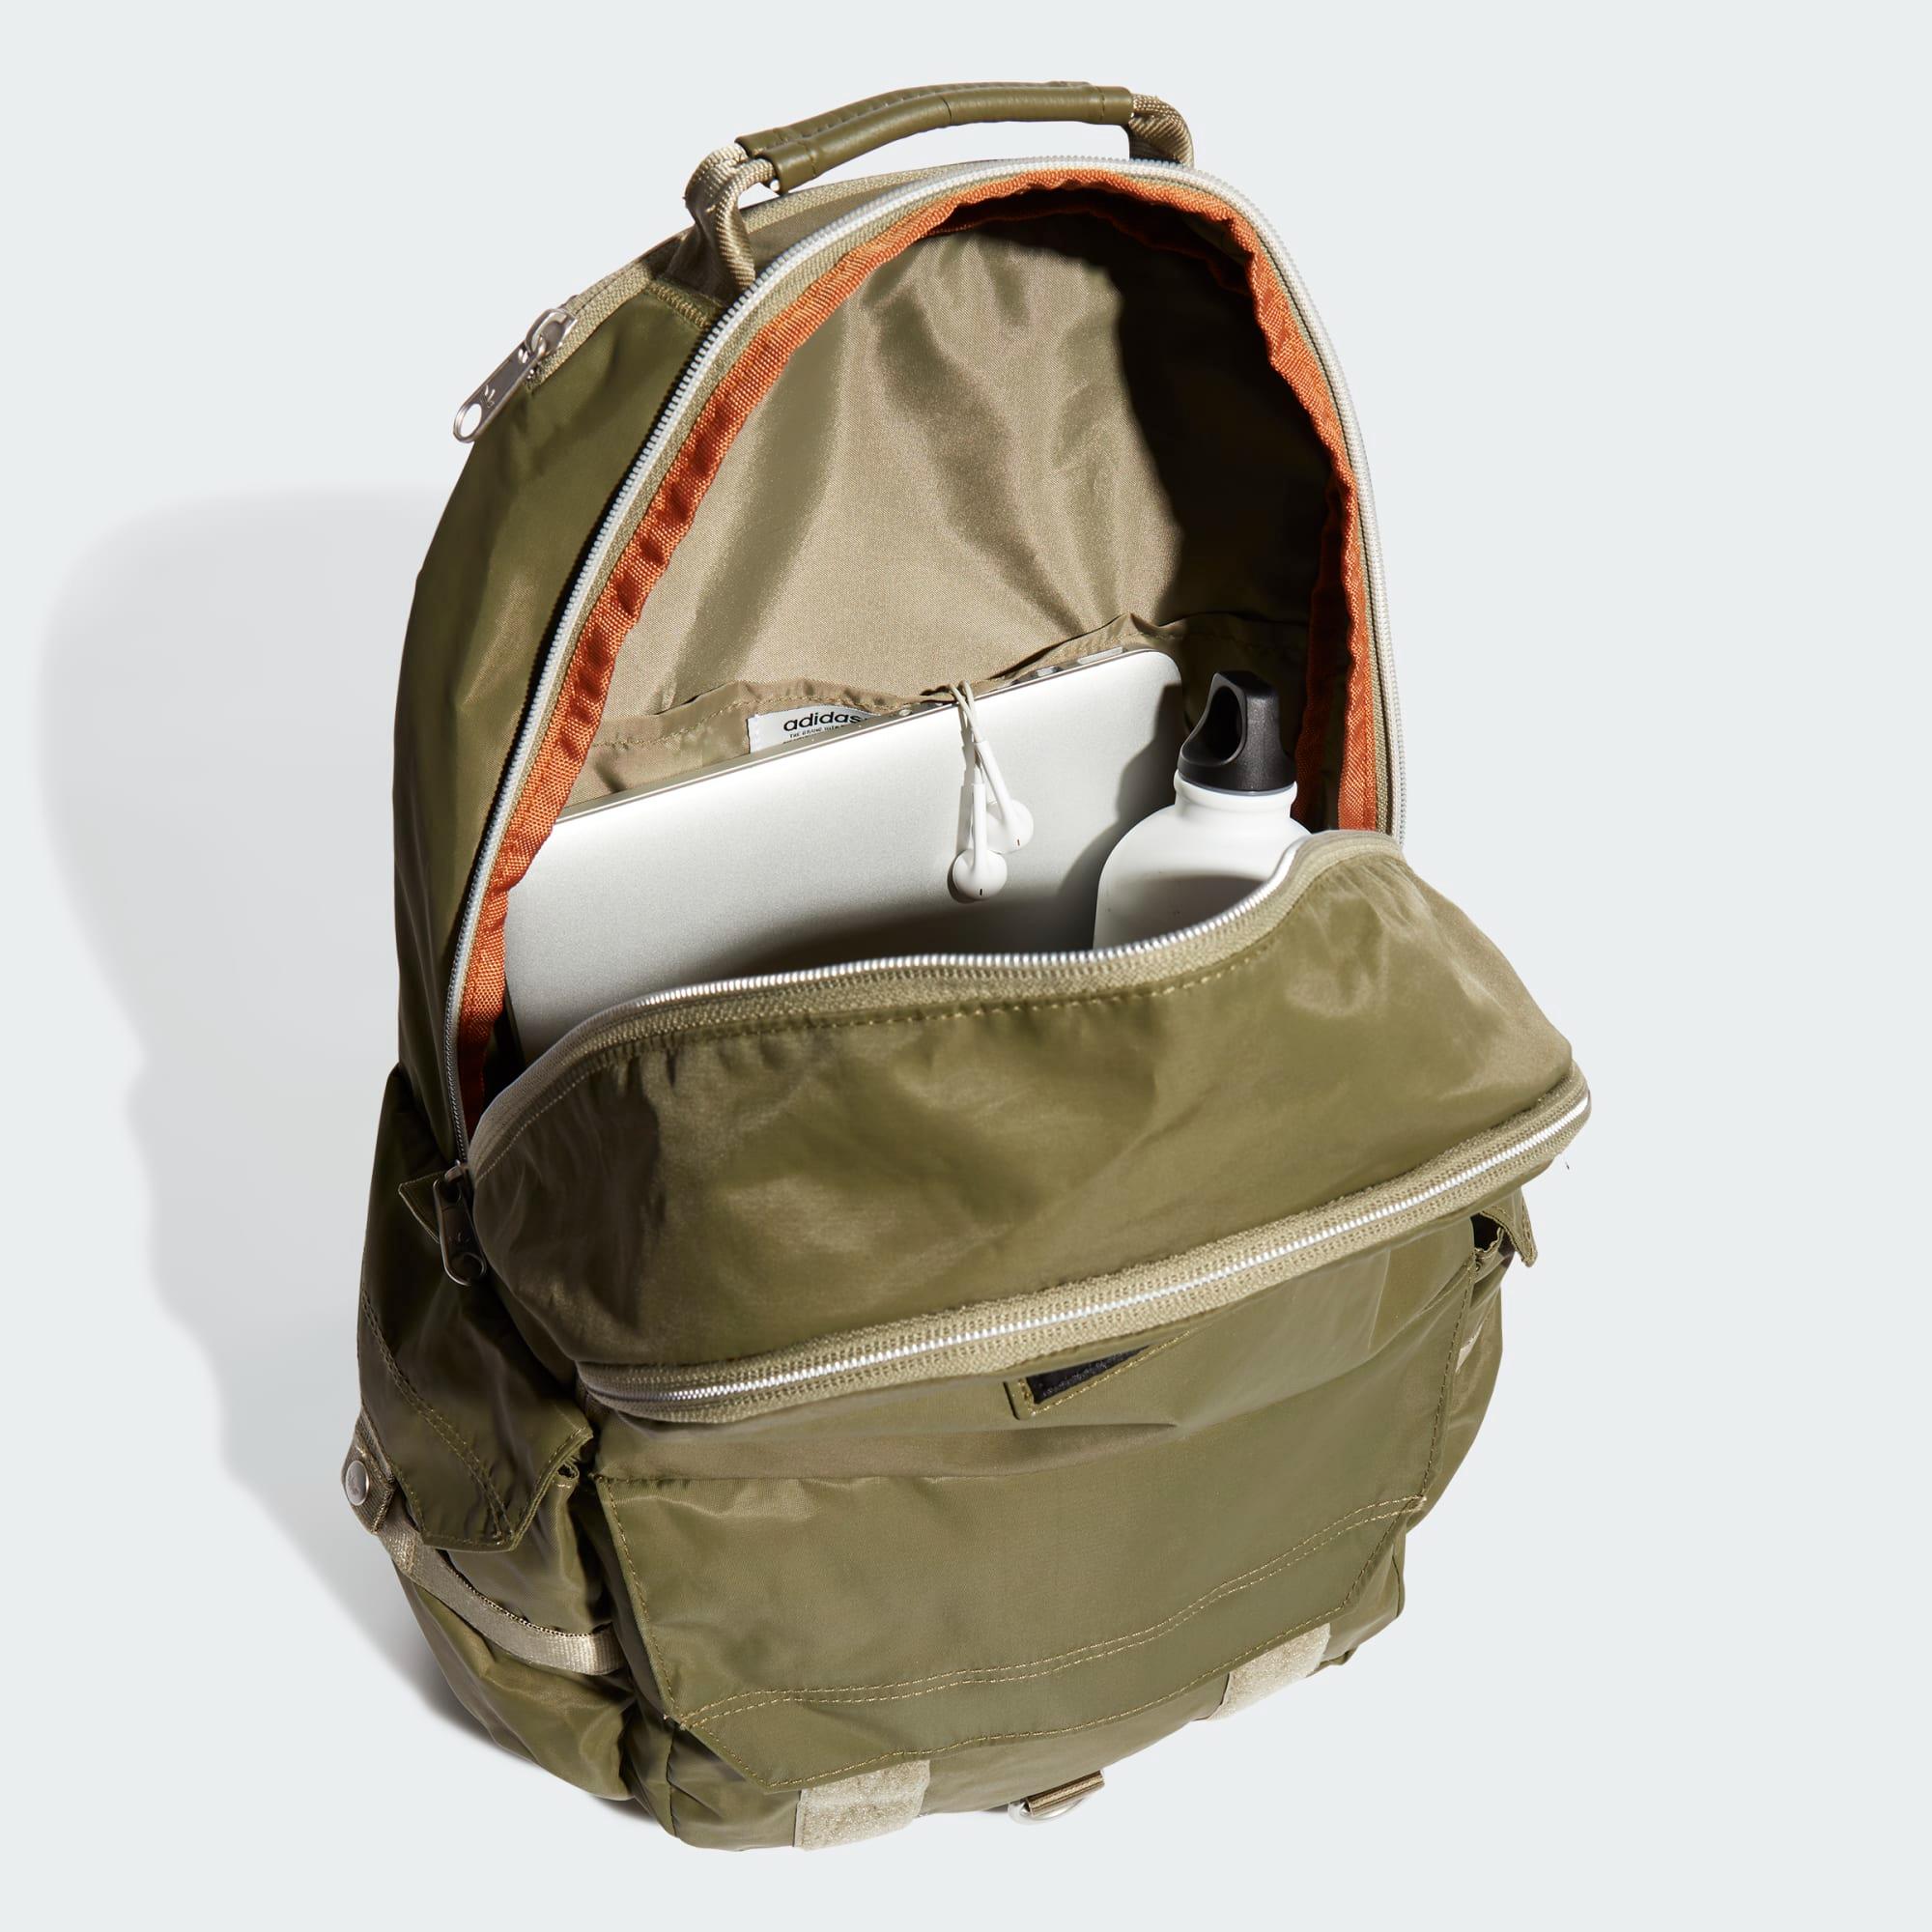 adidas Originals Modern Utility Backpack in Green for Men | Lyst